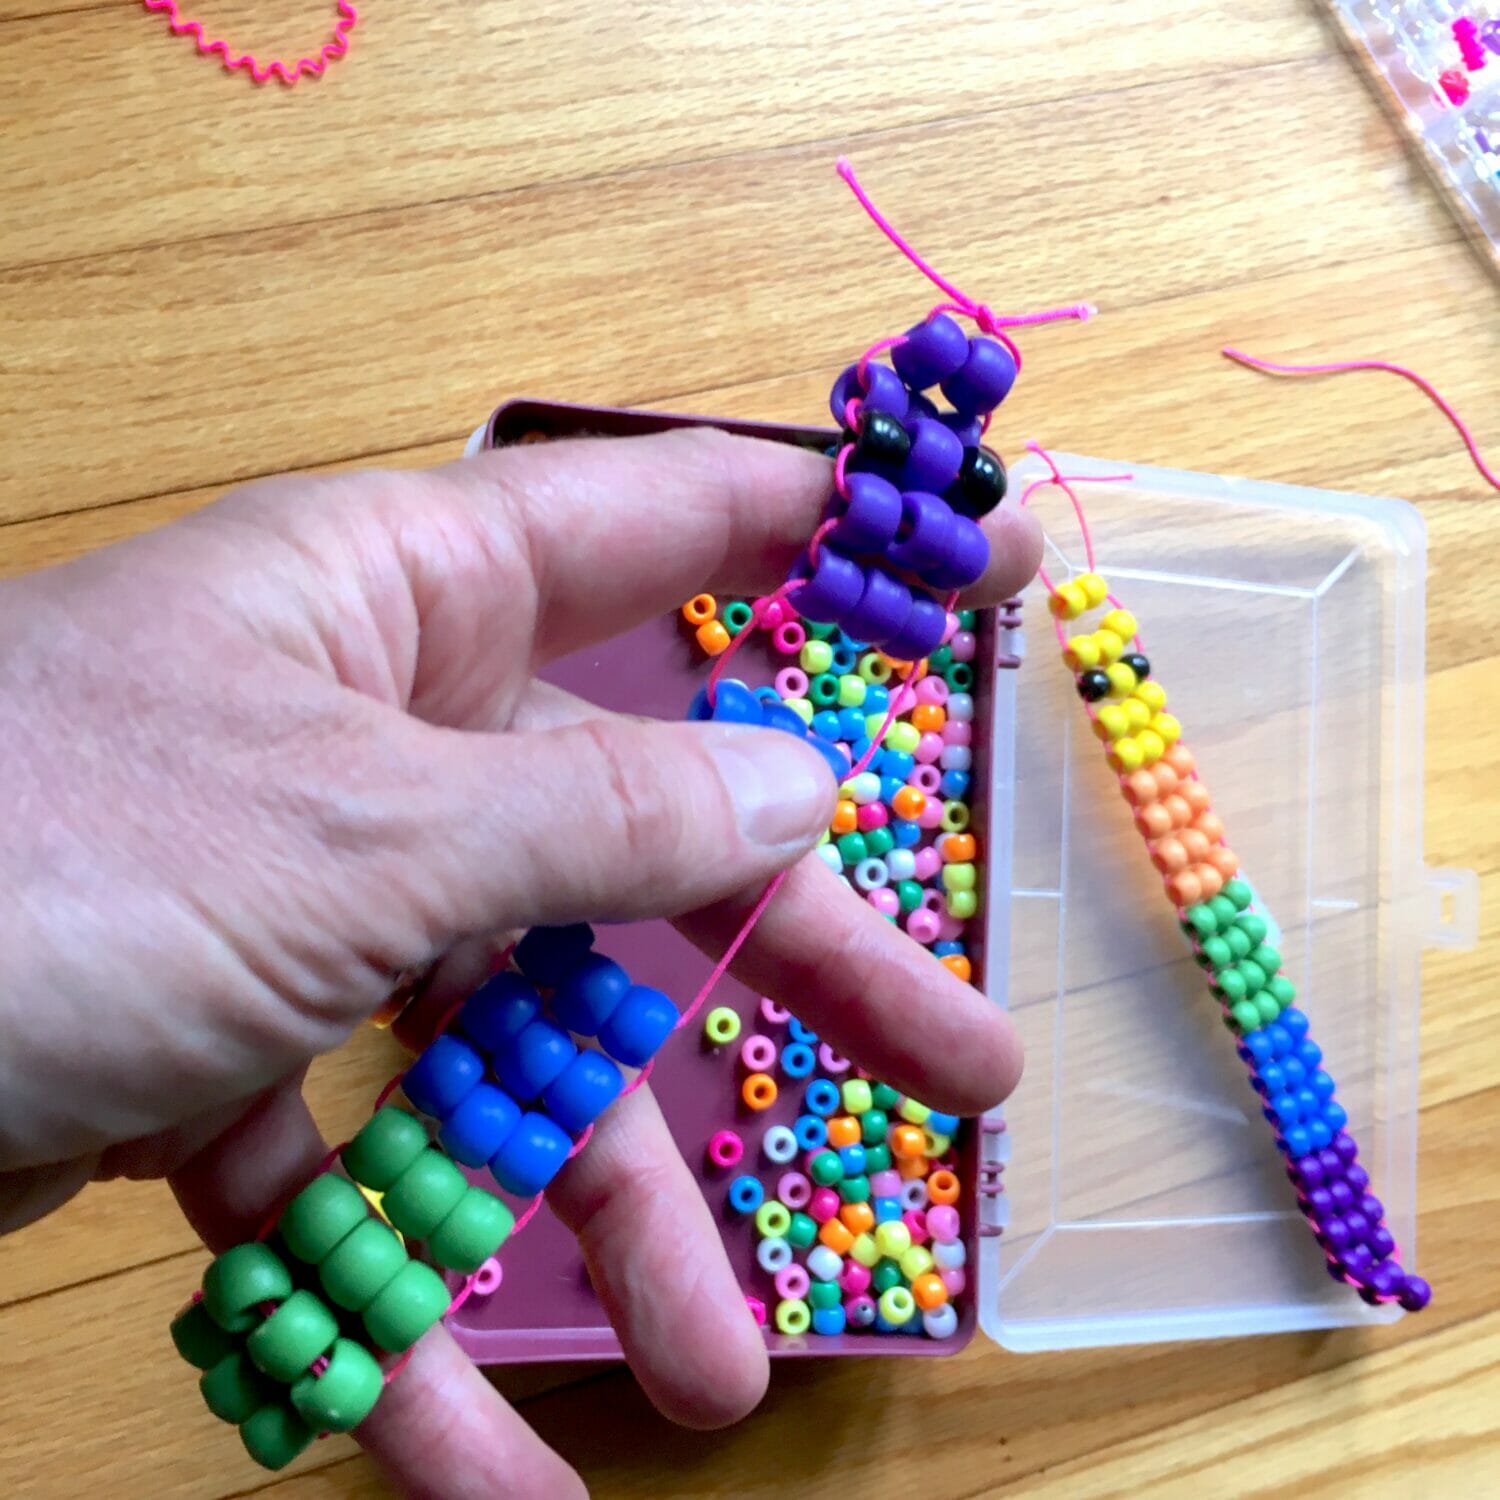 DIY fidget toys are fun to make, and will help kids stay calm and focused when school starts. These cute beaded snakes are my kids' fave, and easy to make.